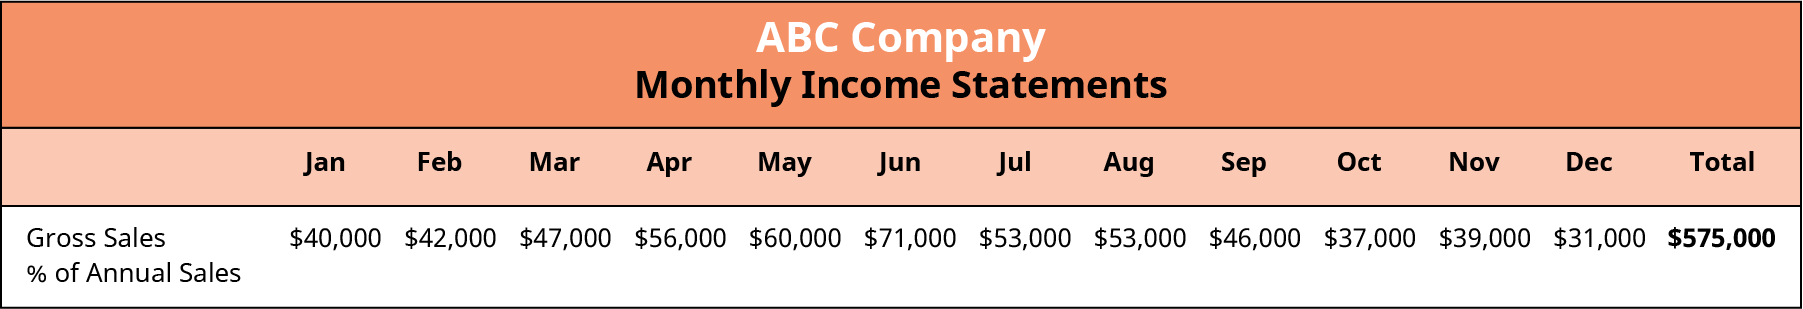 The monthly income statement of ABC company shows gross sales by month: January - $40,000; February - $42,000; March - $47,000; April - $56,000; May - $60,000; June - $71,000; July - $53,000; August - $53,000; September - $46,000; October - $37,000; November - $39,000; and December - $31,000.  The total sales for the year is $575,000.